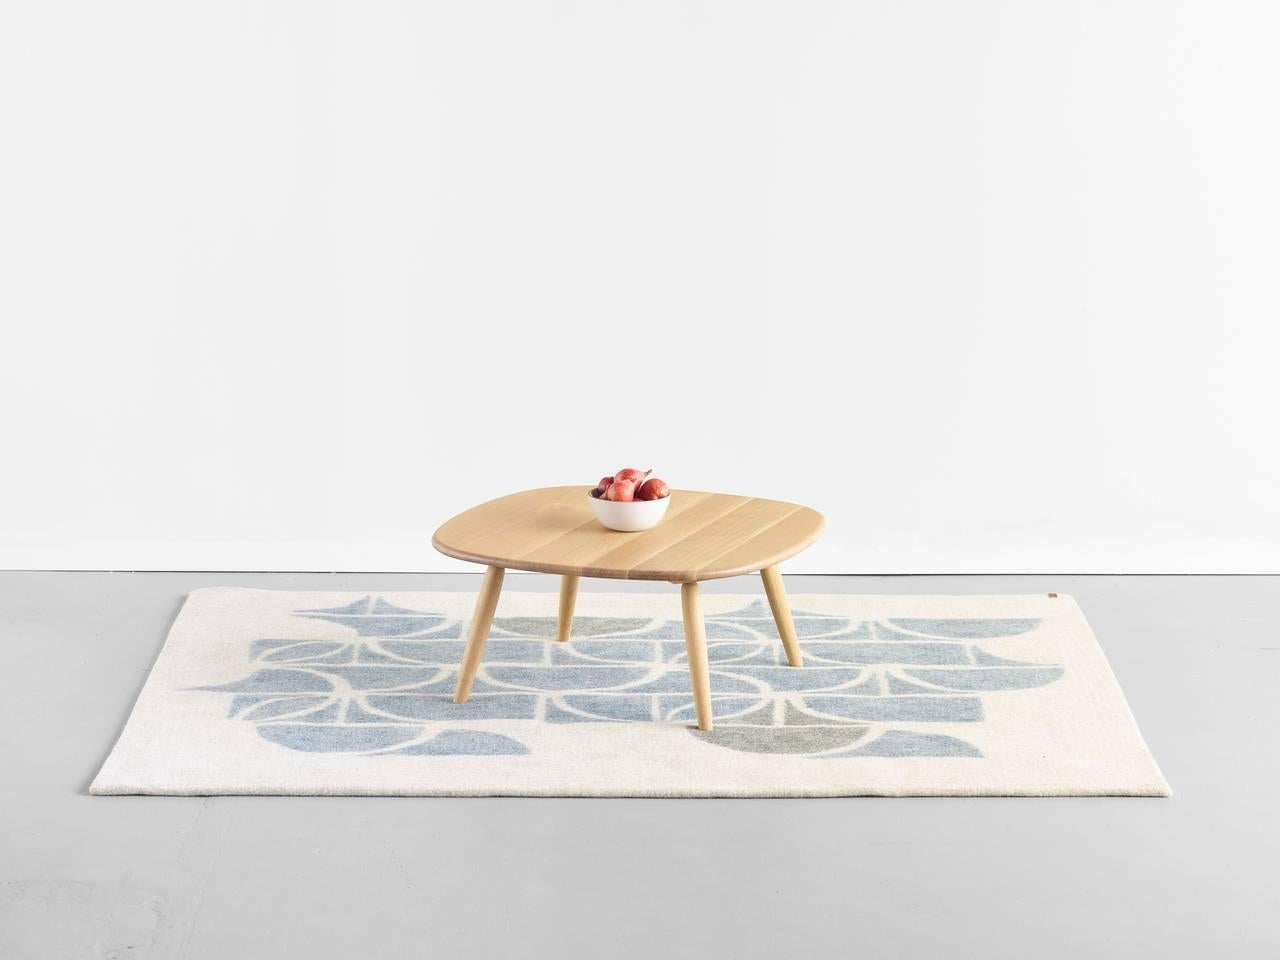 This medium oak coffee table from the Nomad Collection from Jacob May, exclusively at Heath Ceramics, is also available in two other finishes, oxidized oak and natural walnut. All finishes are available in patchwork style. 

The table proves that